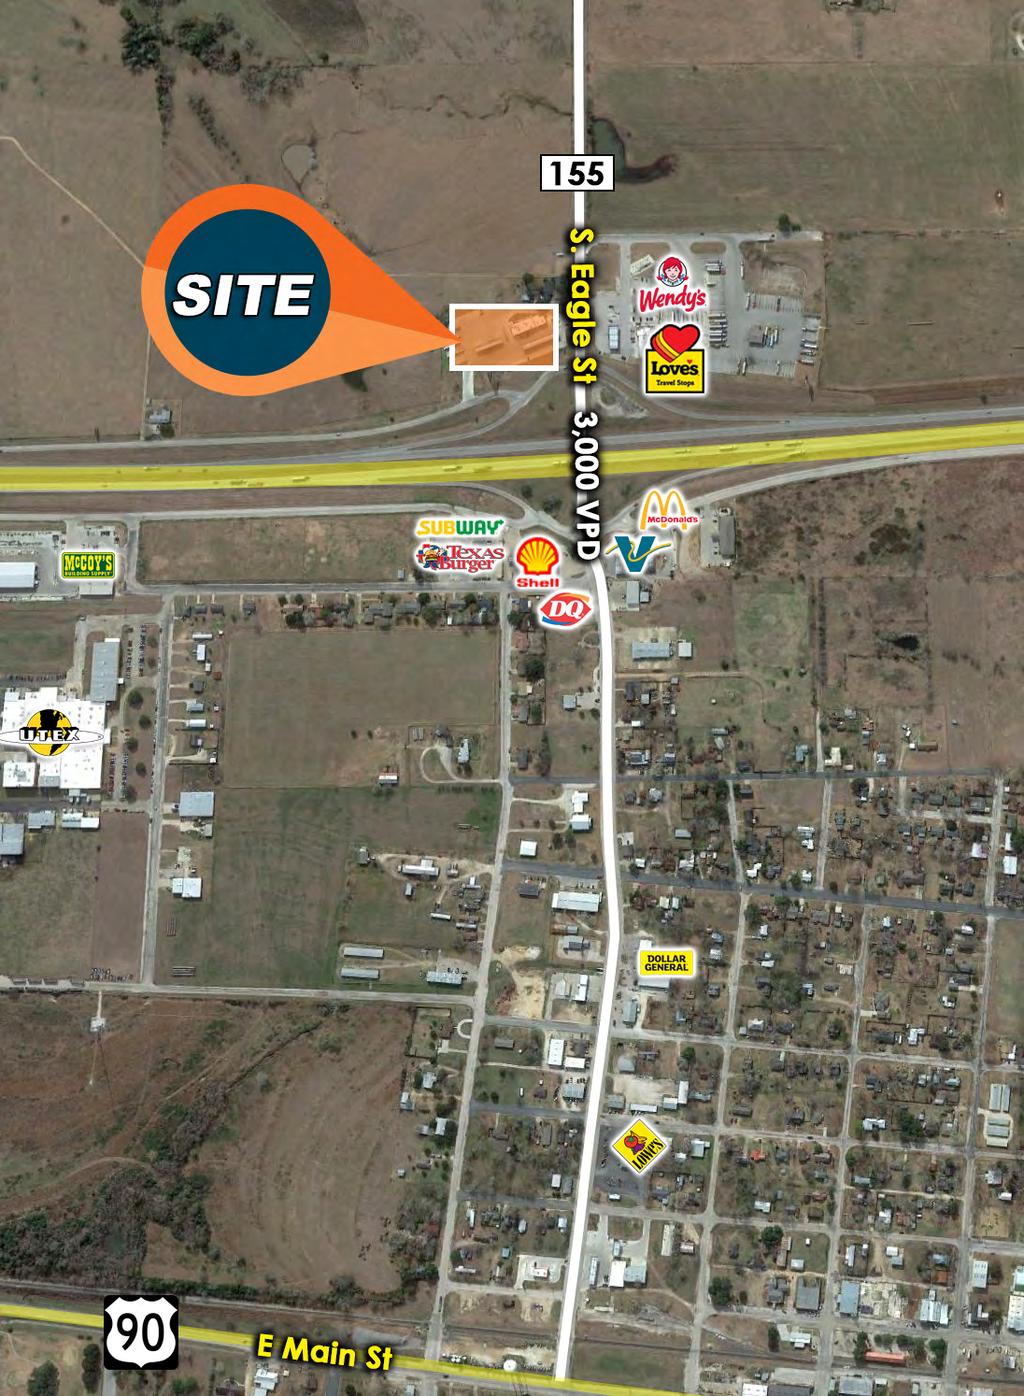 EXECUTIVE SUMMARY Sale Price $4,775,000.00 For Sale WEIMER, TX TRUCK STOP 901 Eagle St., Weimar, Texas 78962 Building Size 7,184 SF Land Size Year Built 2009 3.